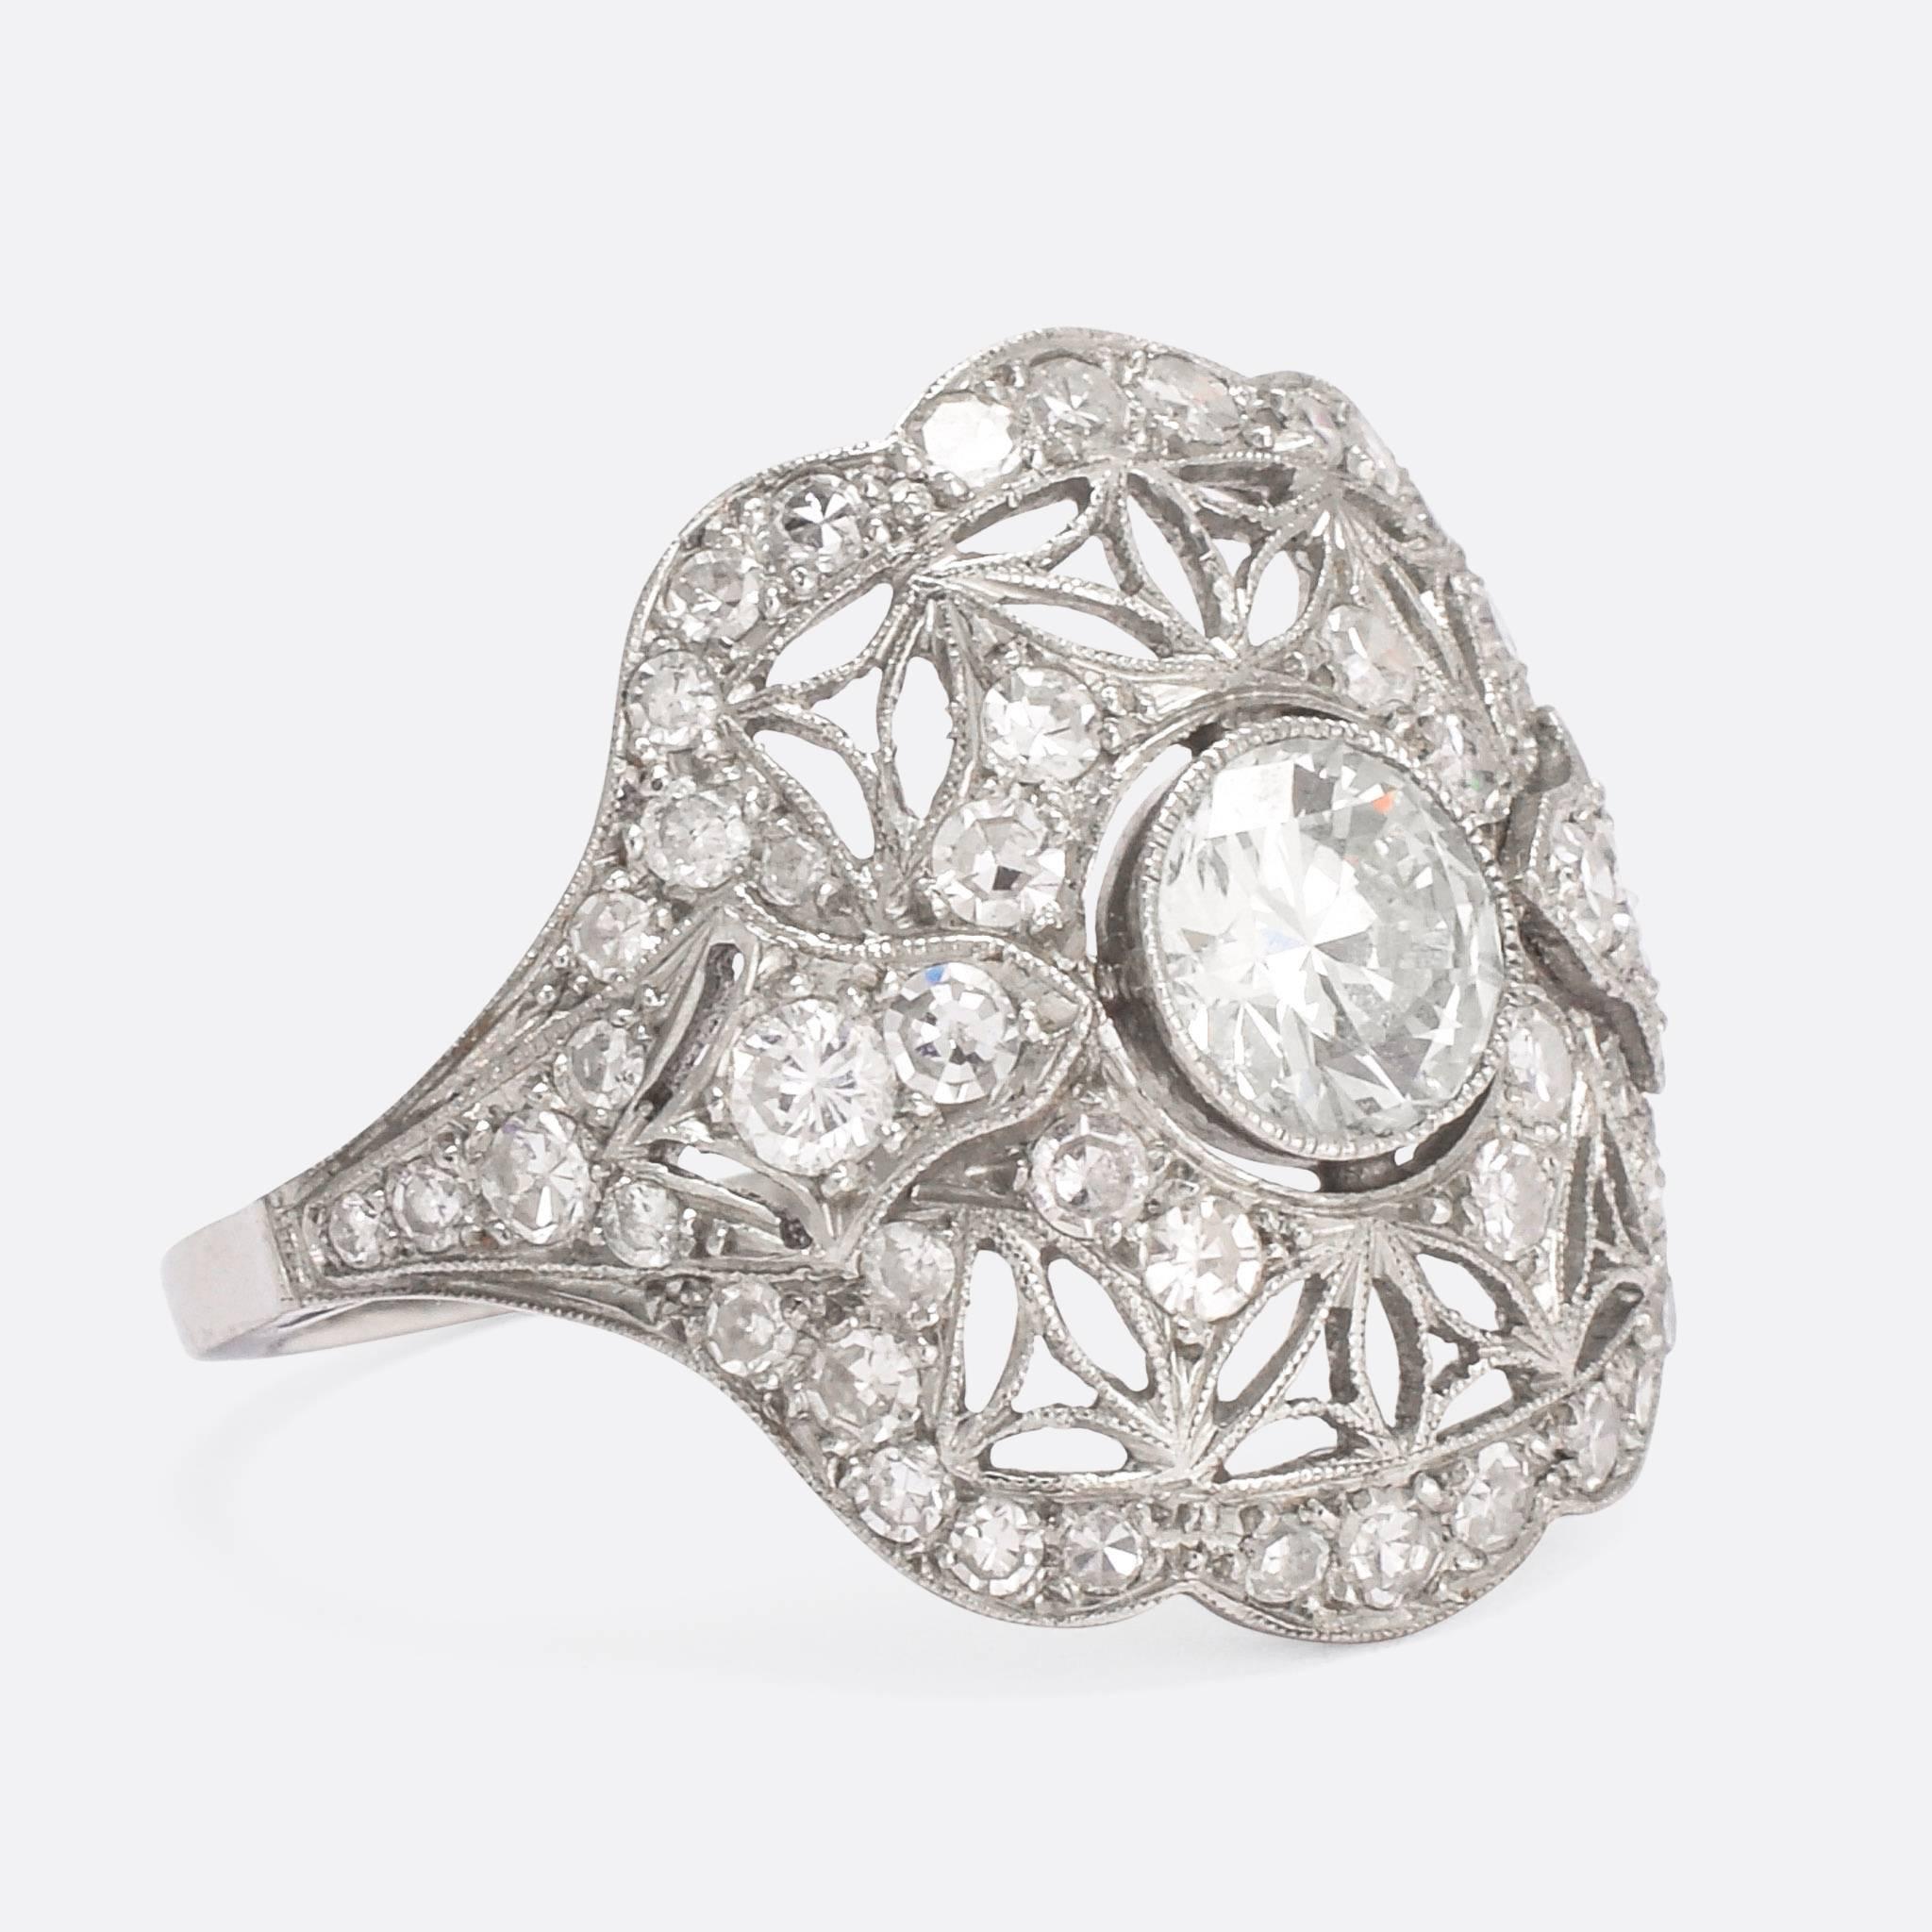 A stunning antique diamond cluster ring, featuring a wonderful delicately openworked head. The central stone is a clean and bright three-quarter carat transitional cut diamond, with an array of further diamonds all around it, set in millegrain. The